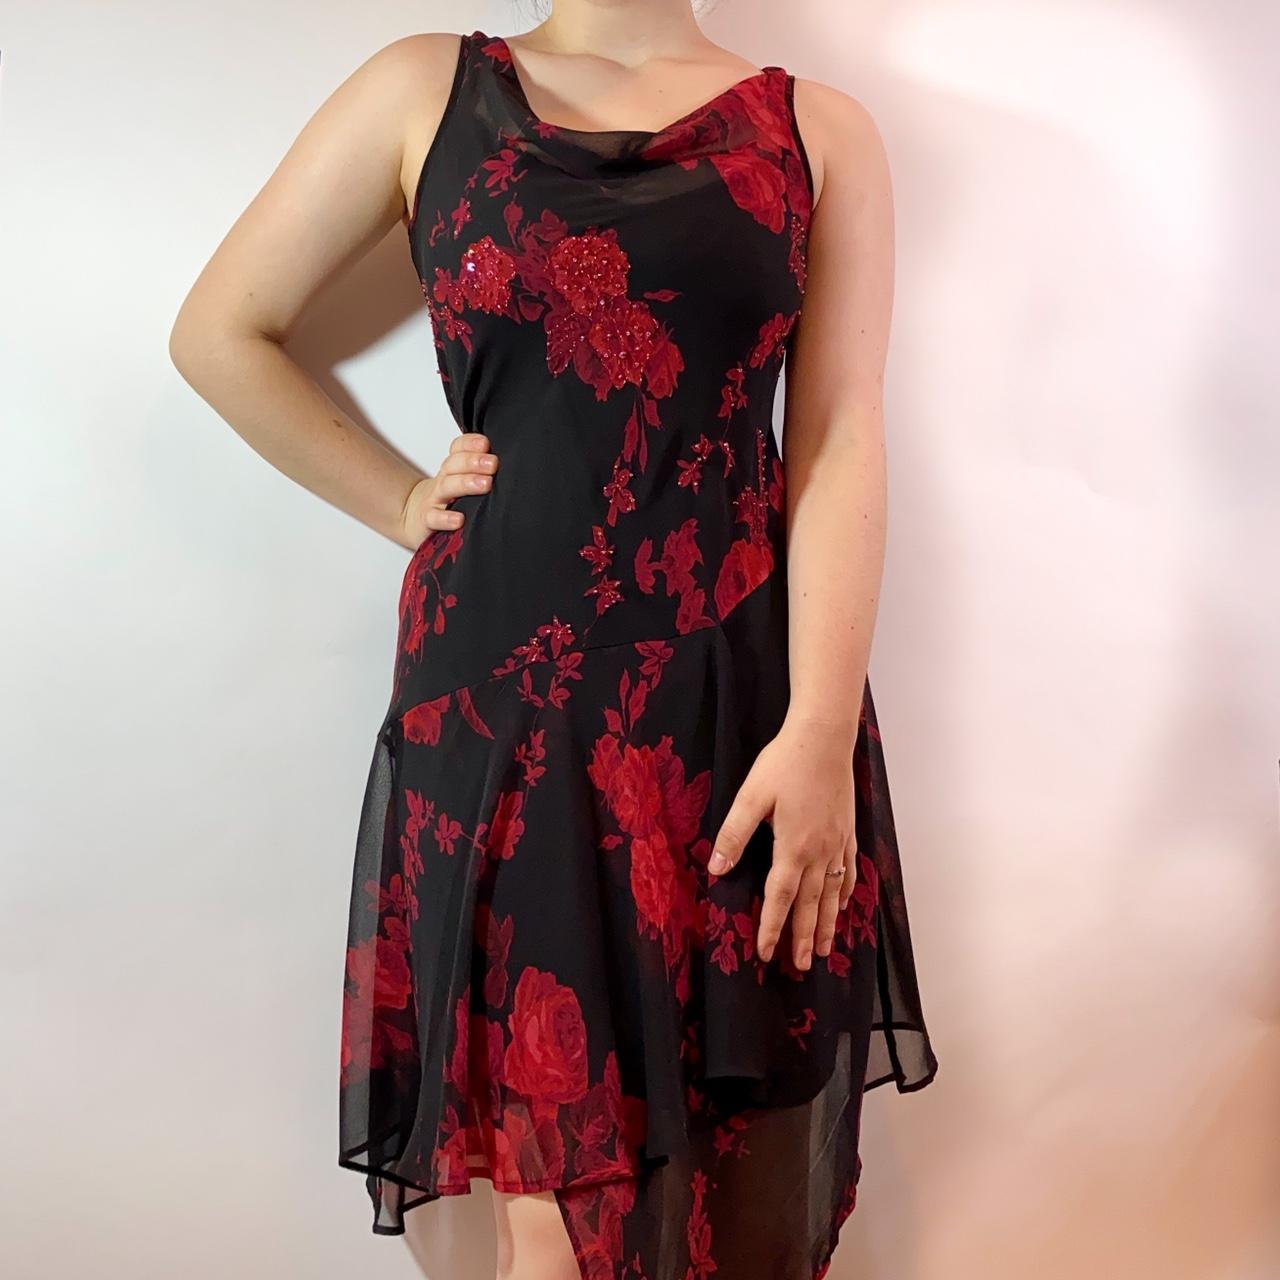 Women's Red and Black Dress